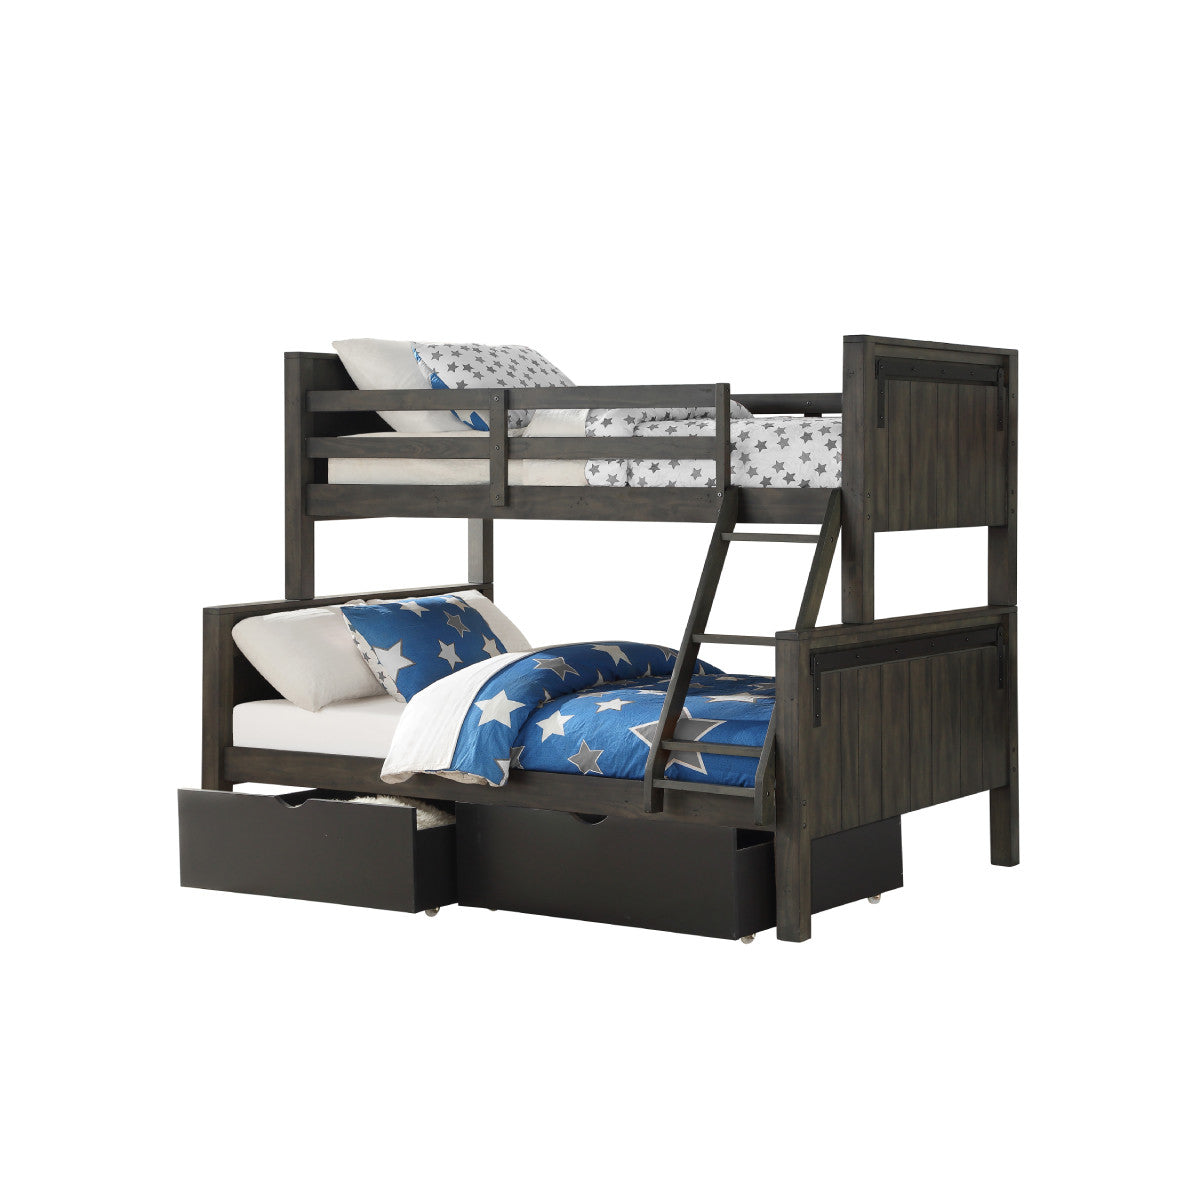 TWIN/FULL BUNK BED IN CITY SHADOW FINISH WITH DUAL UNDERBED DRAWERS IN LOW SHEEN BLACK FINISH